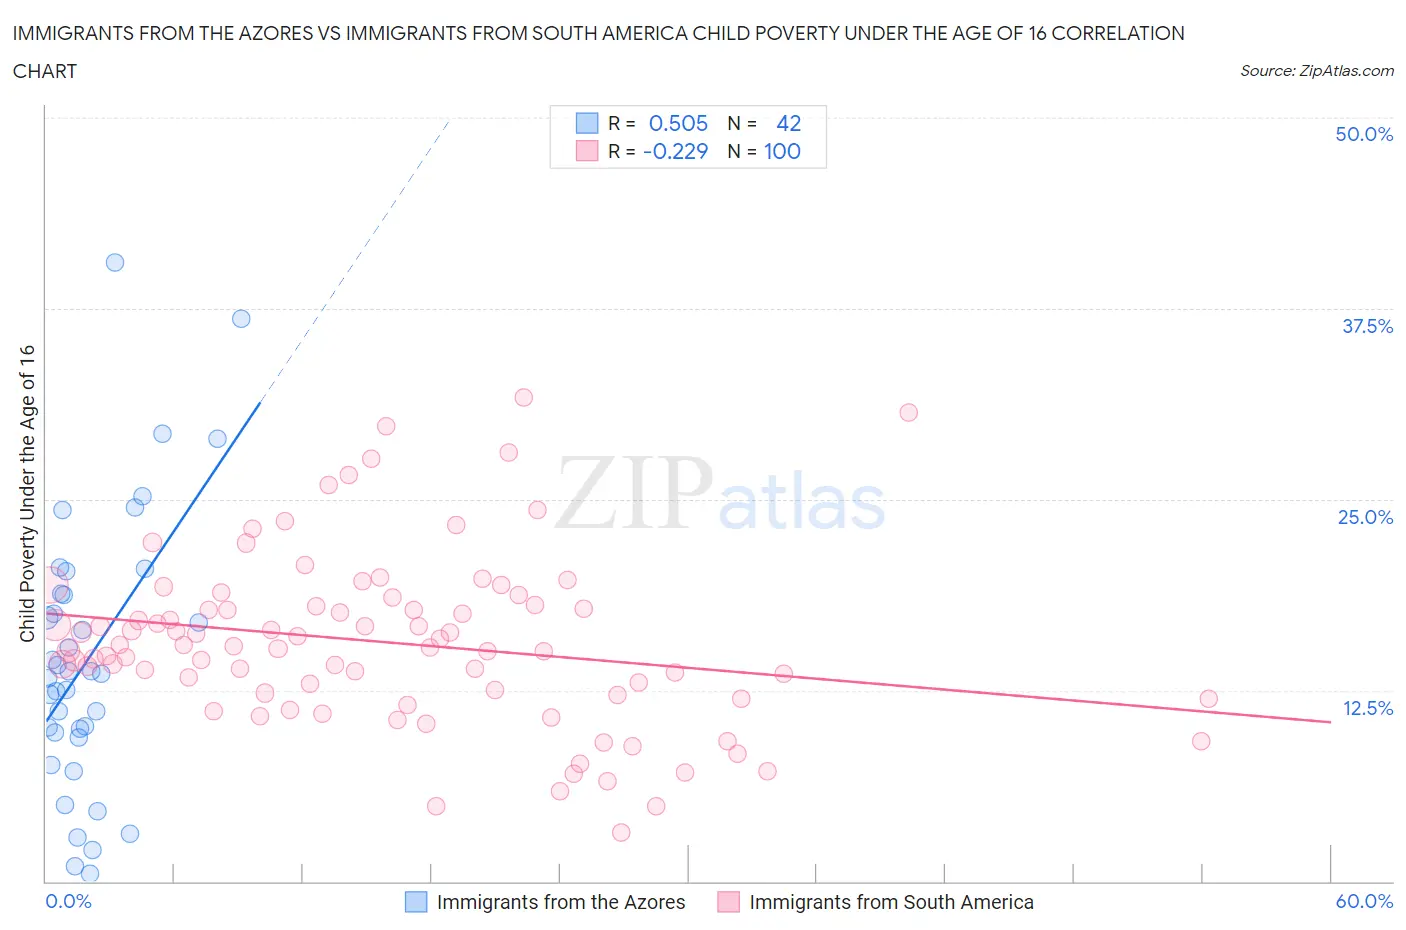 Immigrants from the Azores vs Immigrants from South America Child Poverty Under the Age of 16